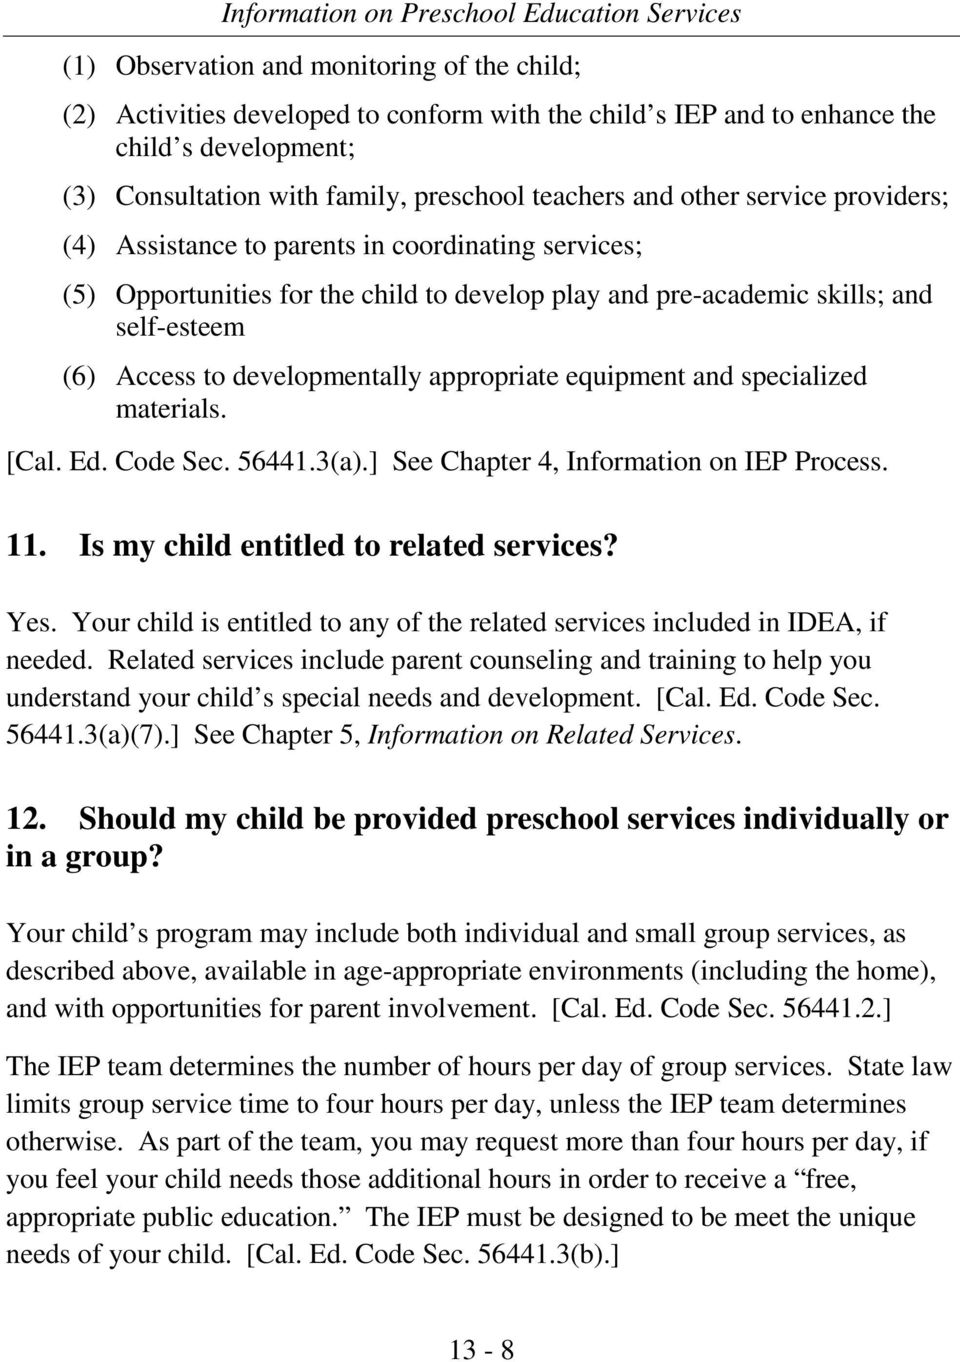 appropriate equipment and specialized materials. [Cal. Ed. Code Sec. 56441.3(a).] See Chapter 4, Information on IEP Process. 11. Is my child entitled to related services? Yes.